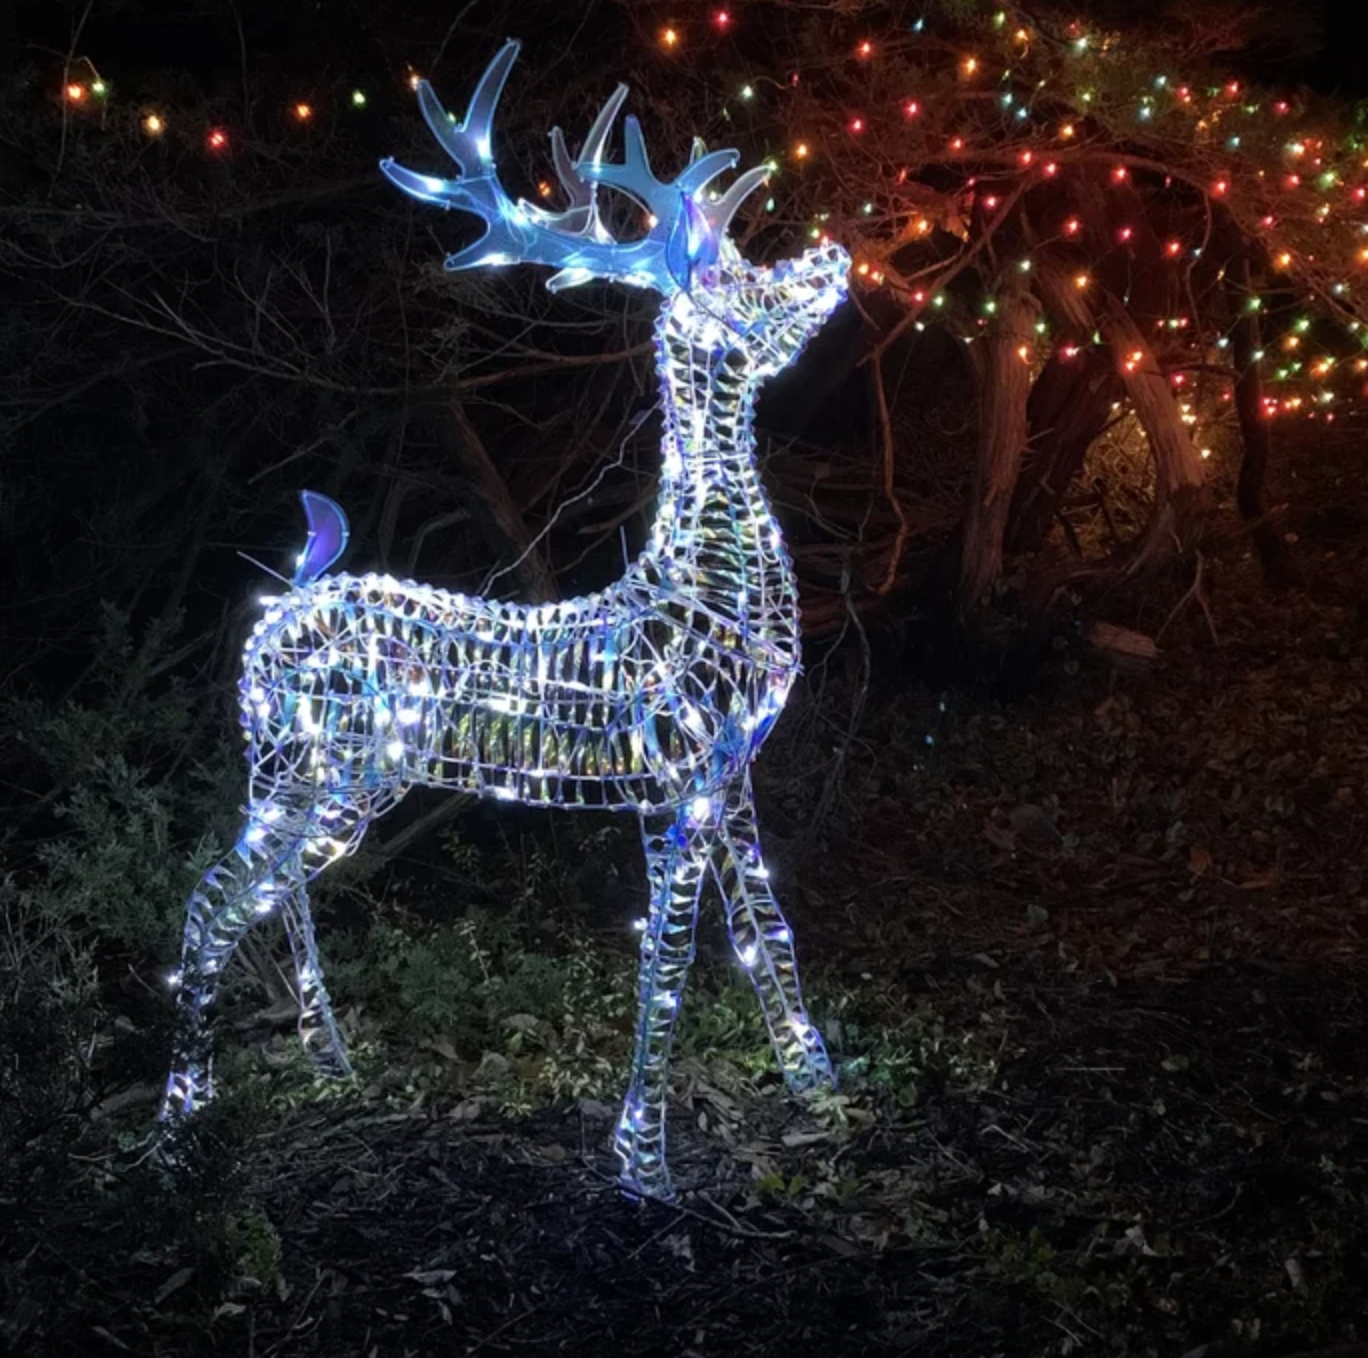 reviewer image of the light up reindeer outside